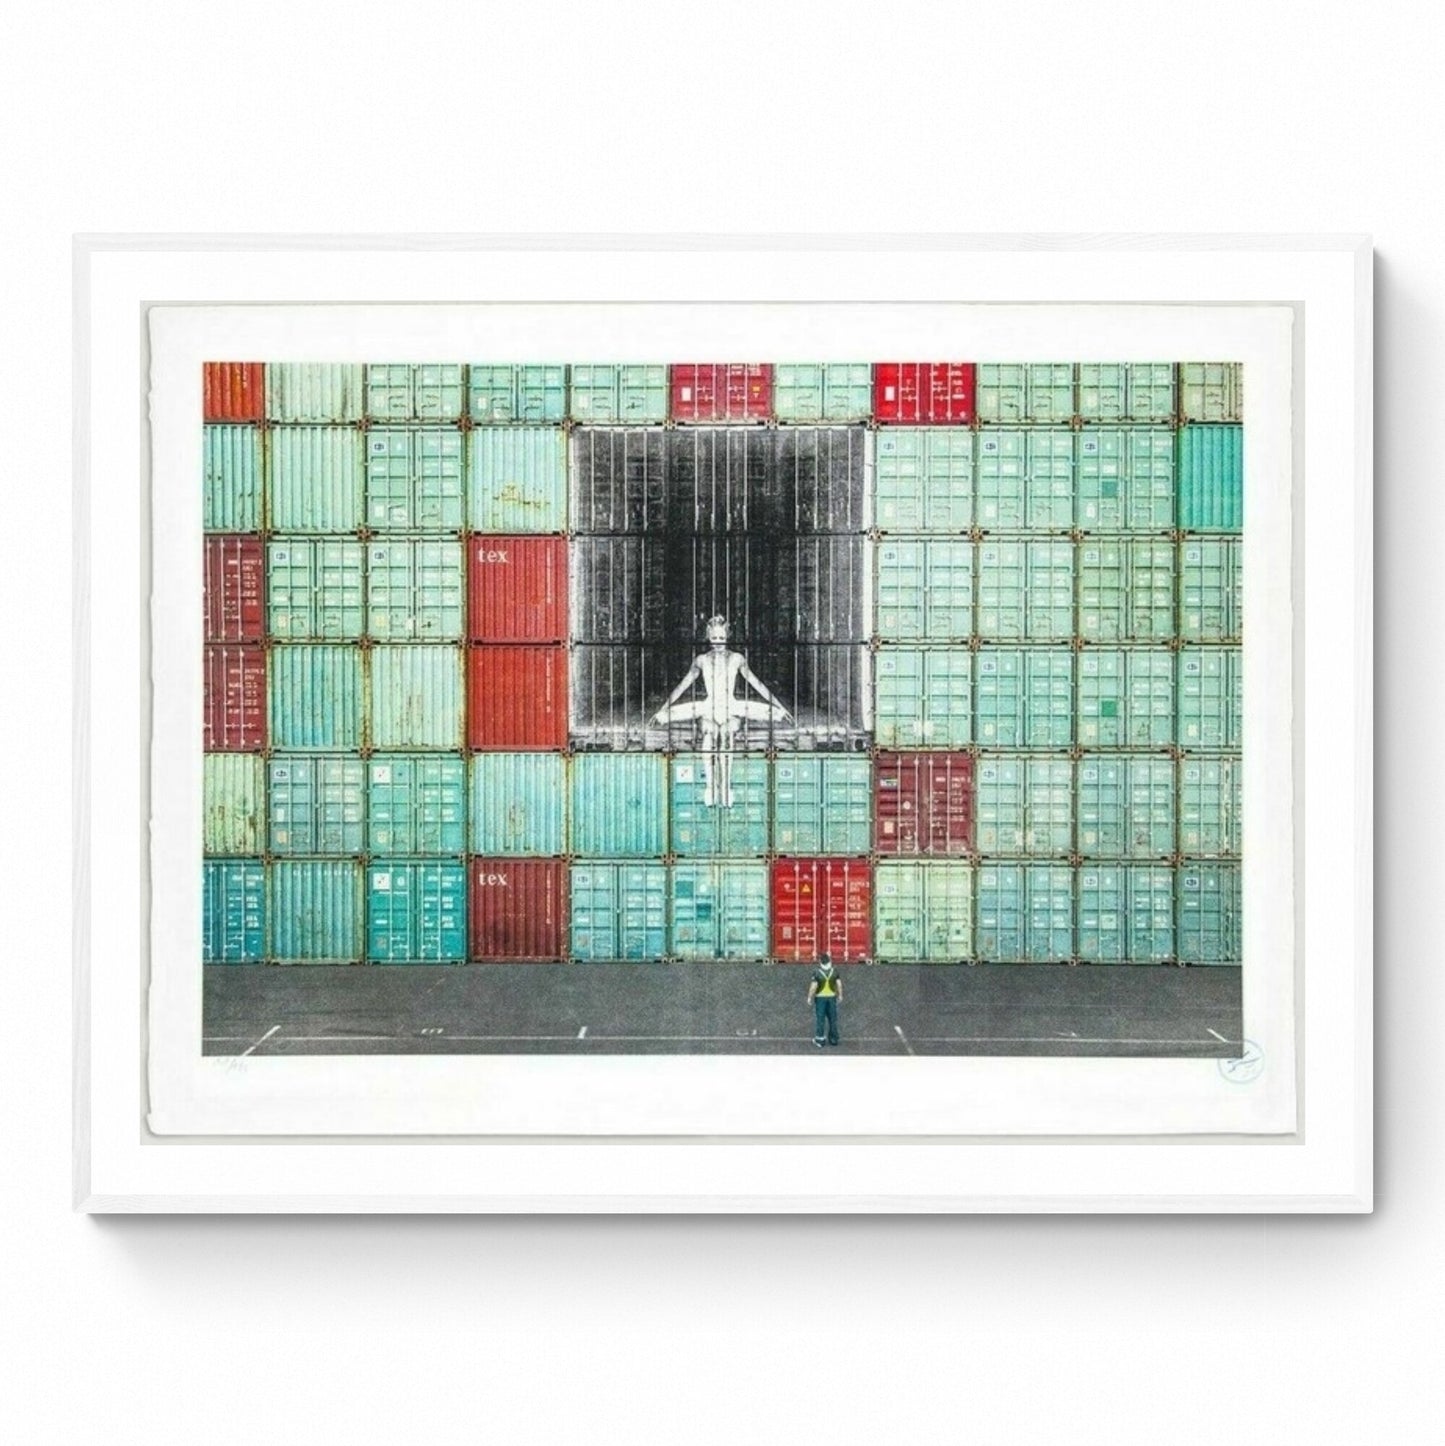 JR, In the container wall, Le Havre, France, 2014, 2020